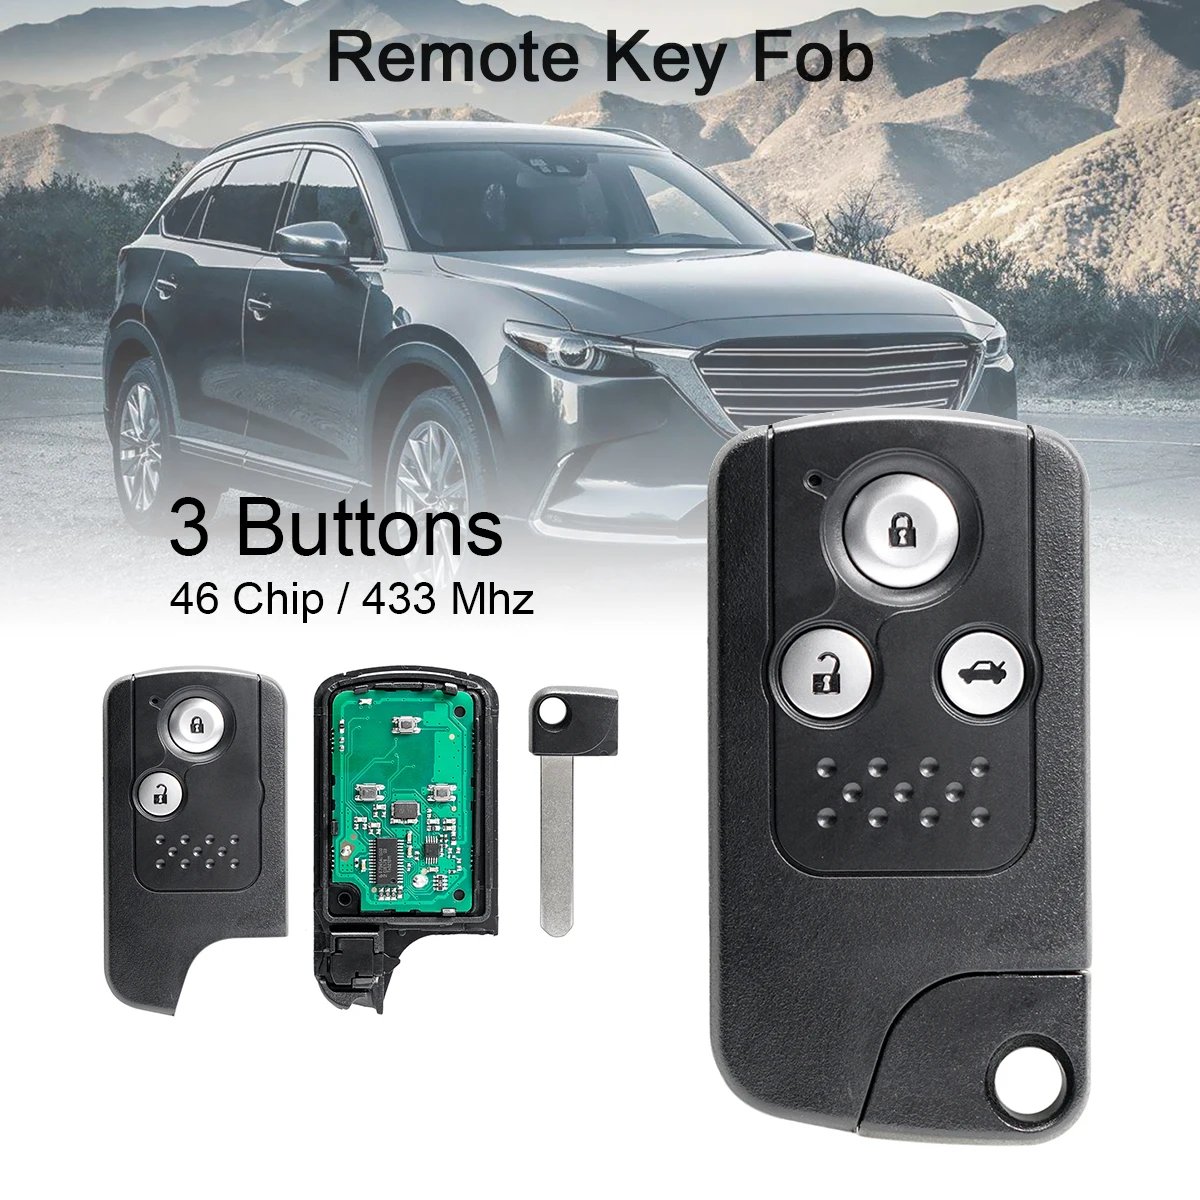 

433Mhz 3 Buttons Car Remote Key with ID46 Chip Replacement Fit for Honda CRV Accord Civic Odyssey Keyless Entry System